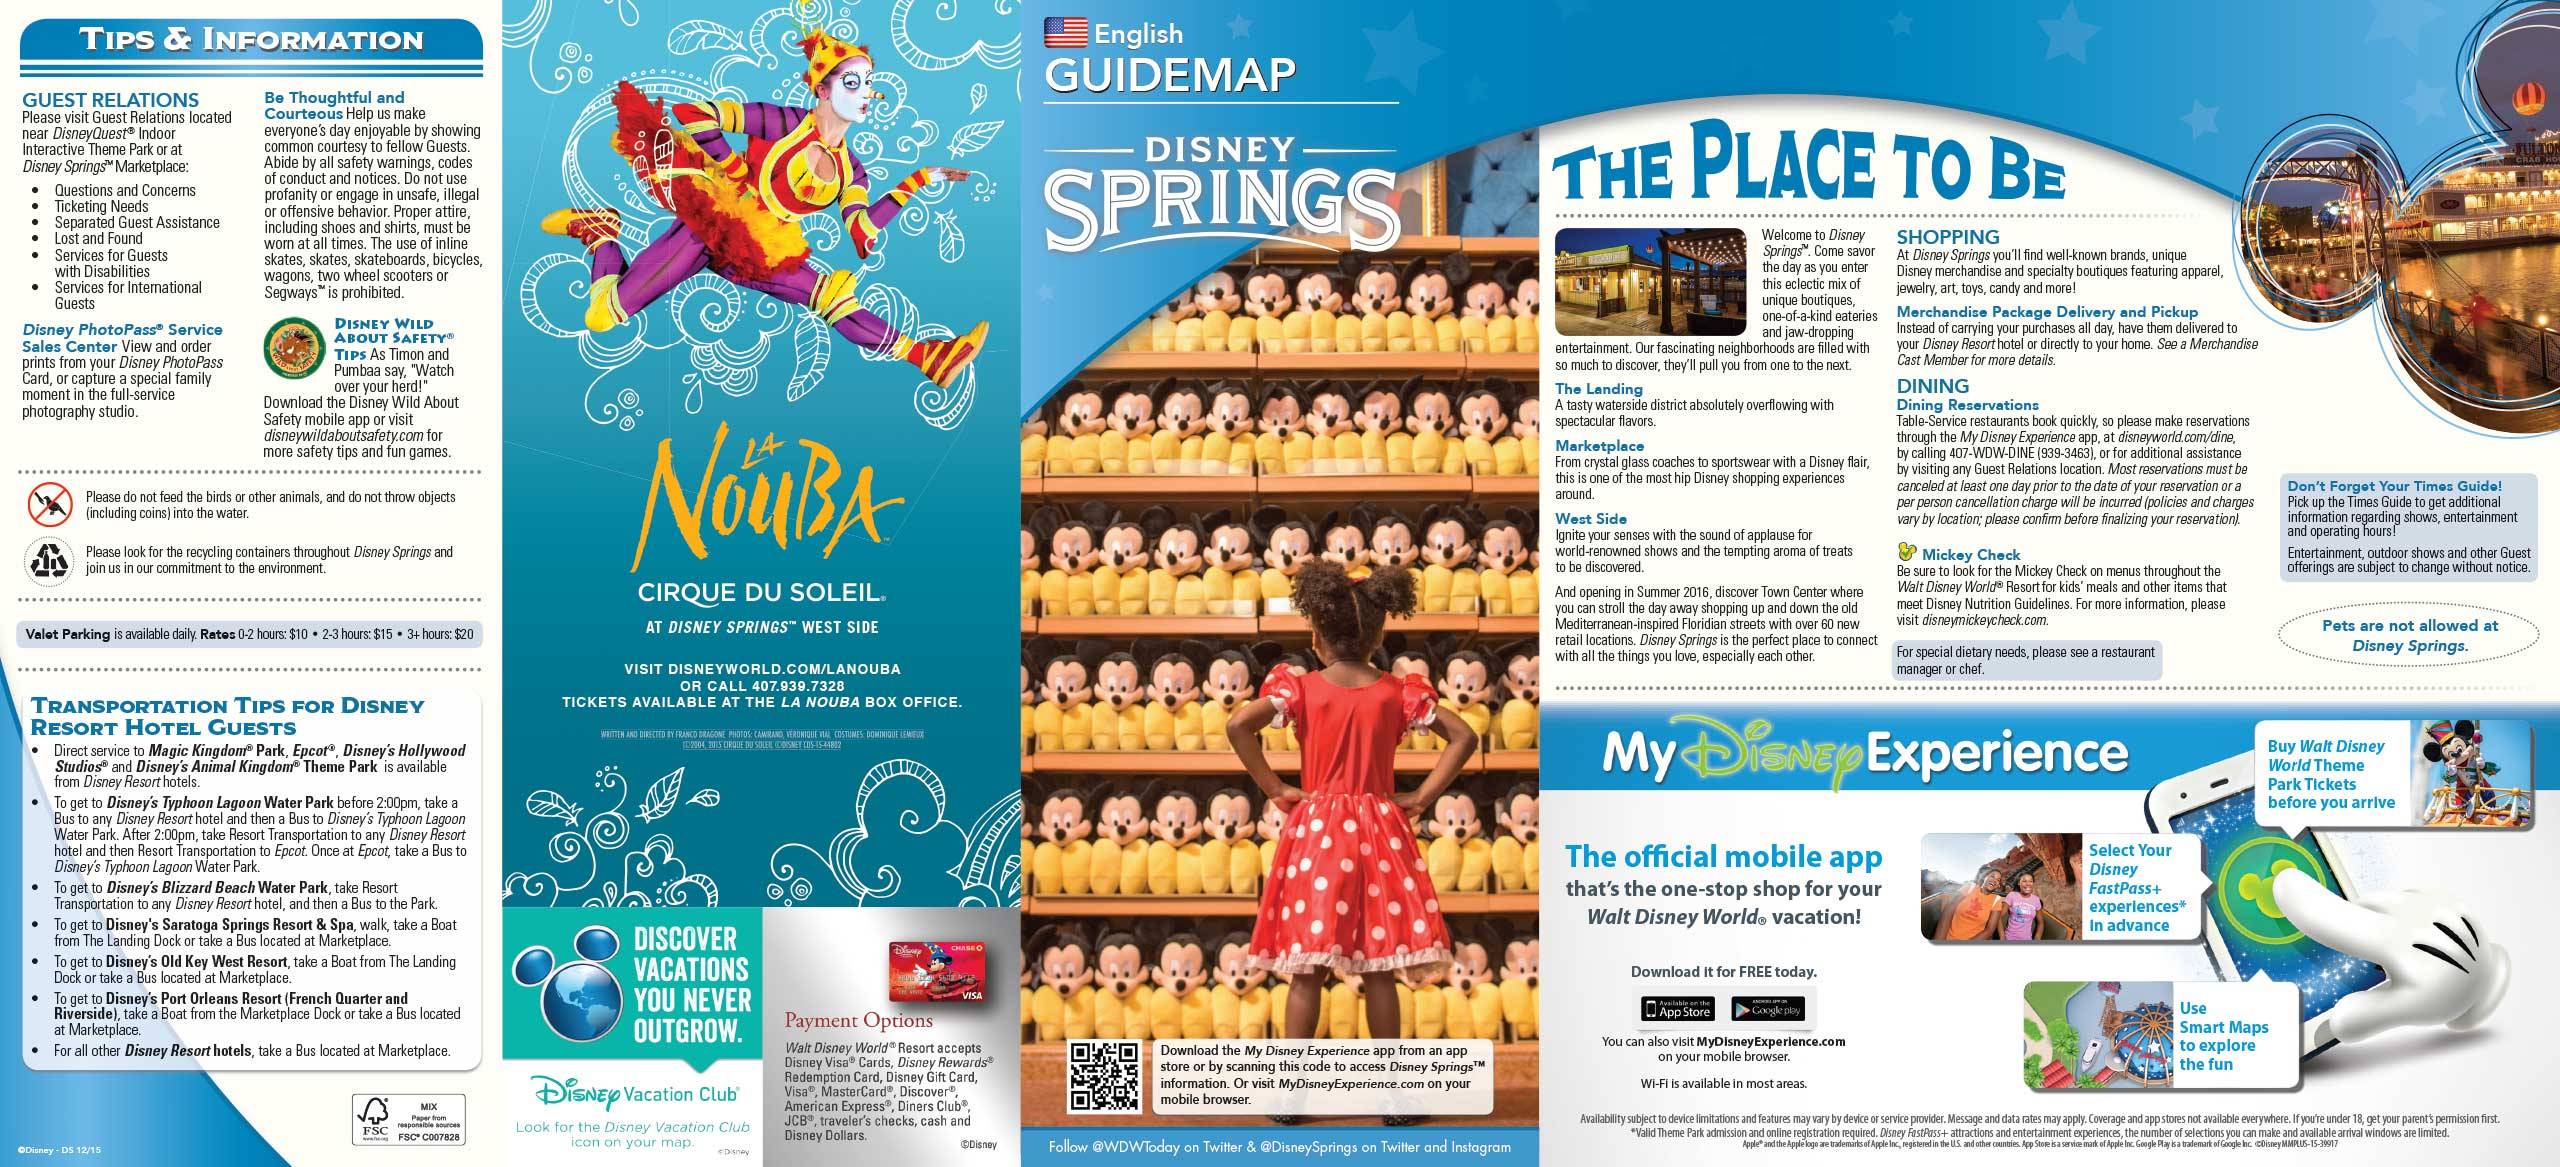 Disney Springs Guide Map January 2016 - Front